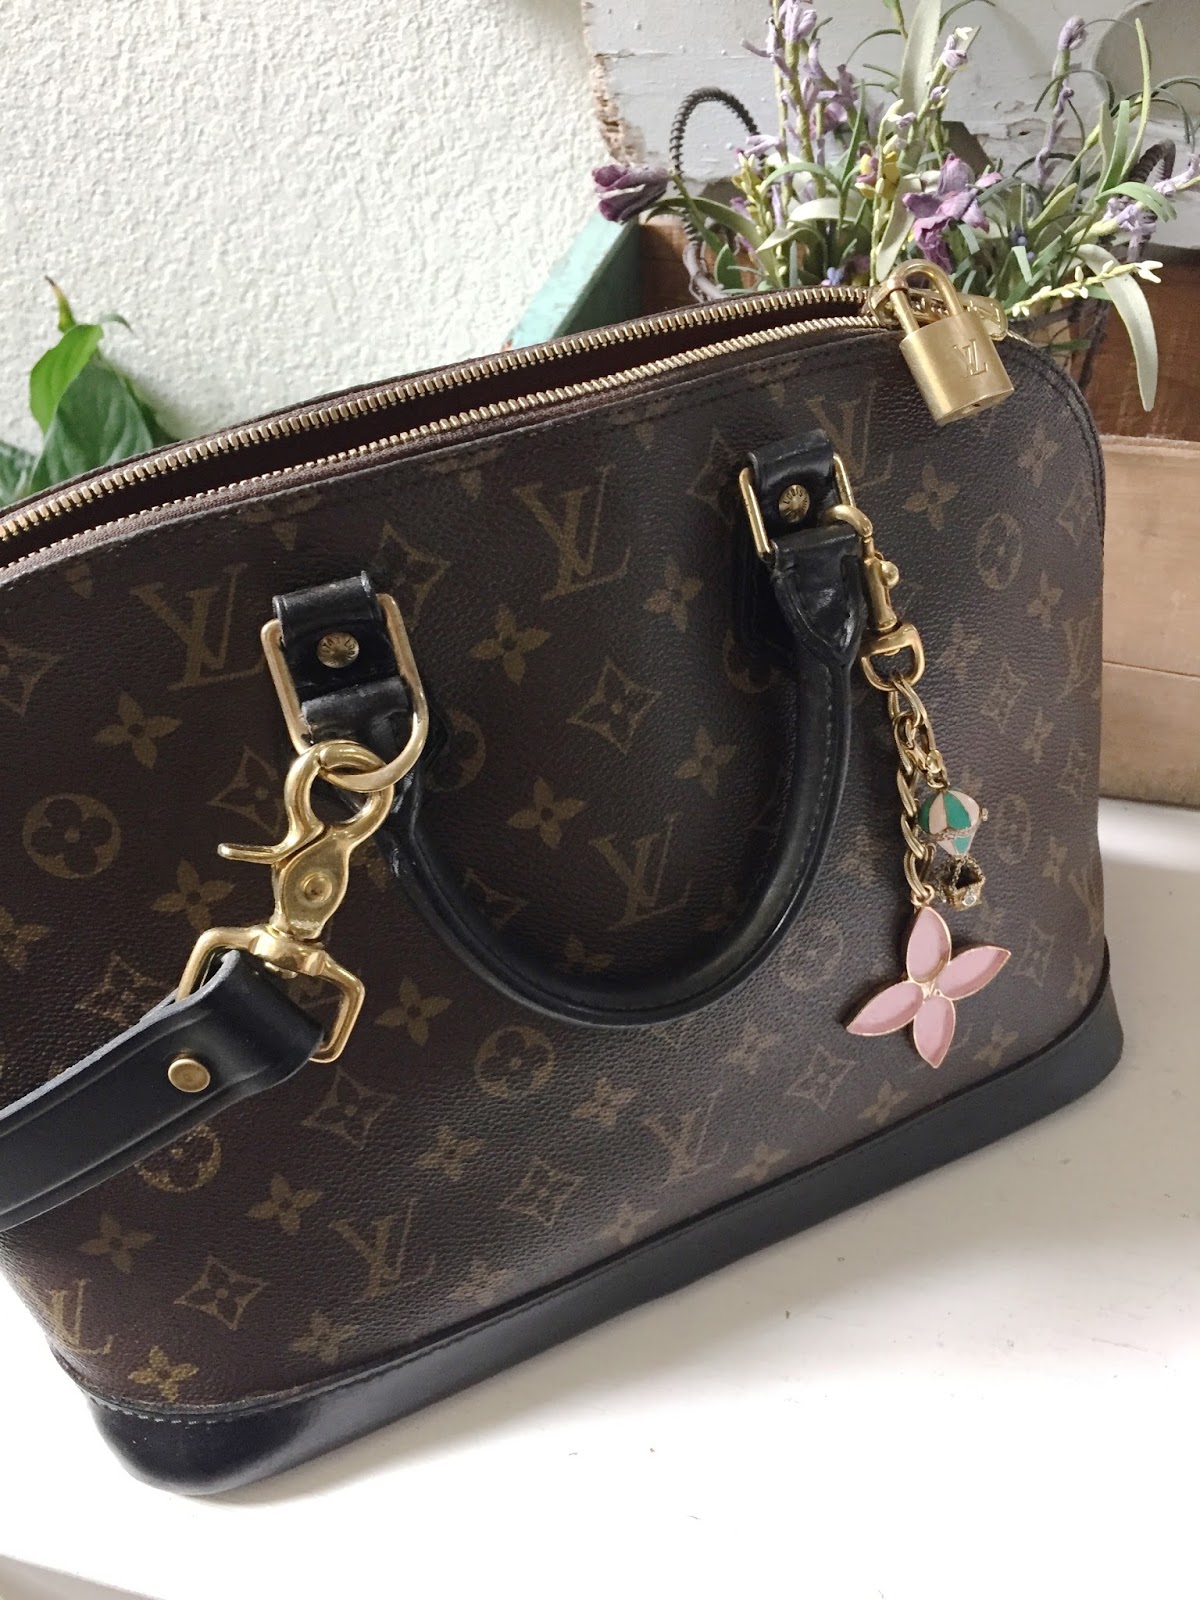 Louis Vuitton Alma in monogram - Bags of CharmBags of Charm